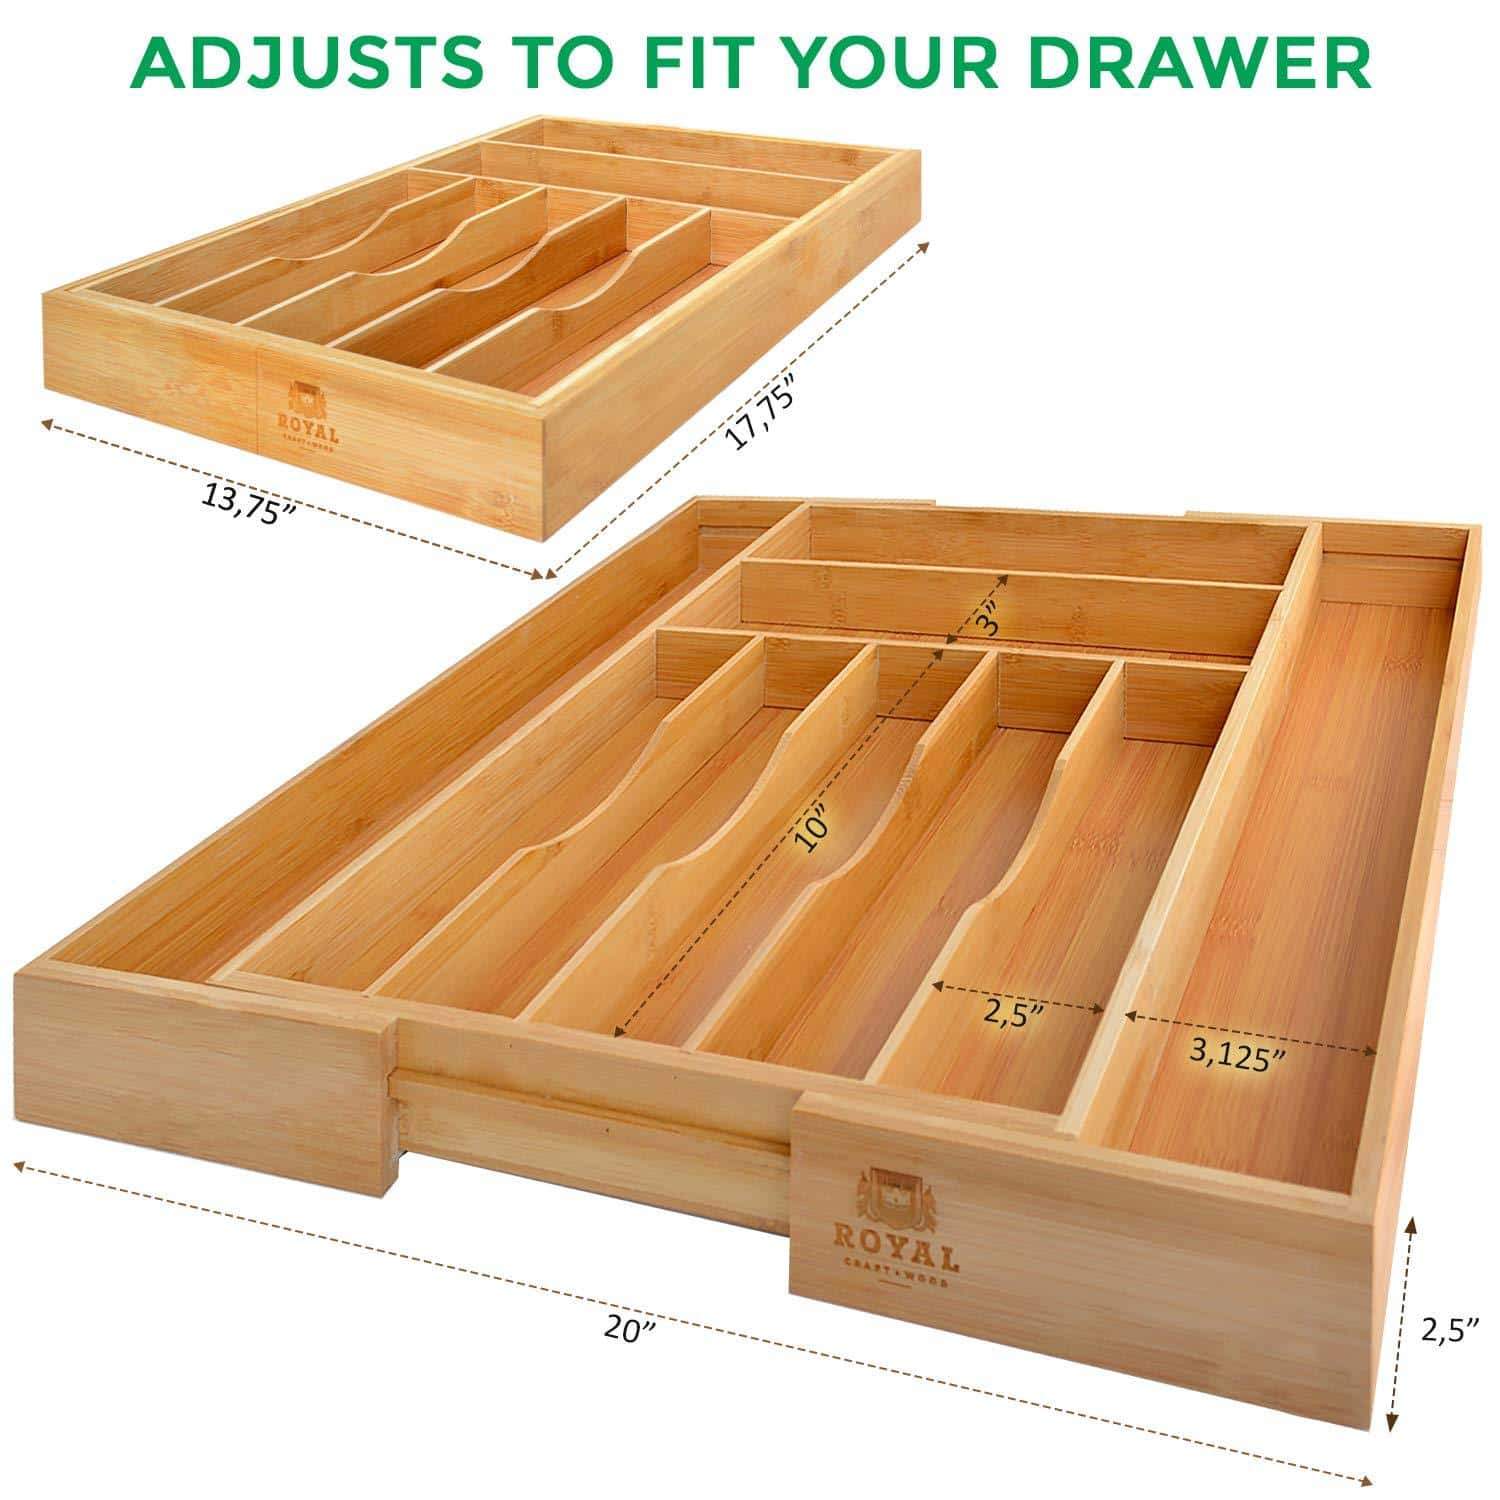 Discover the bamboo kitchen drawer organizer expandable silverware organizer utensil holder and cutlery tray with grooved drawer dividers for flatware and kitchen utensils by royal craft wood